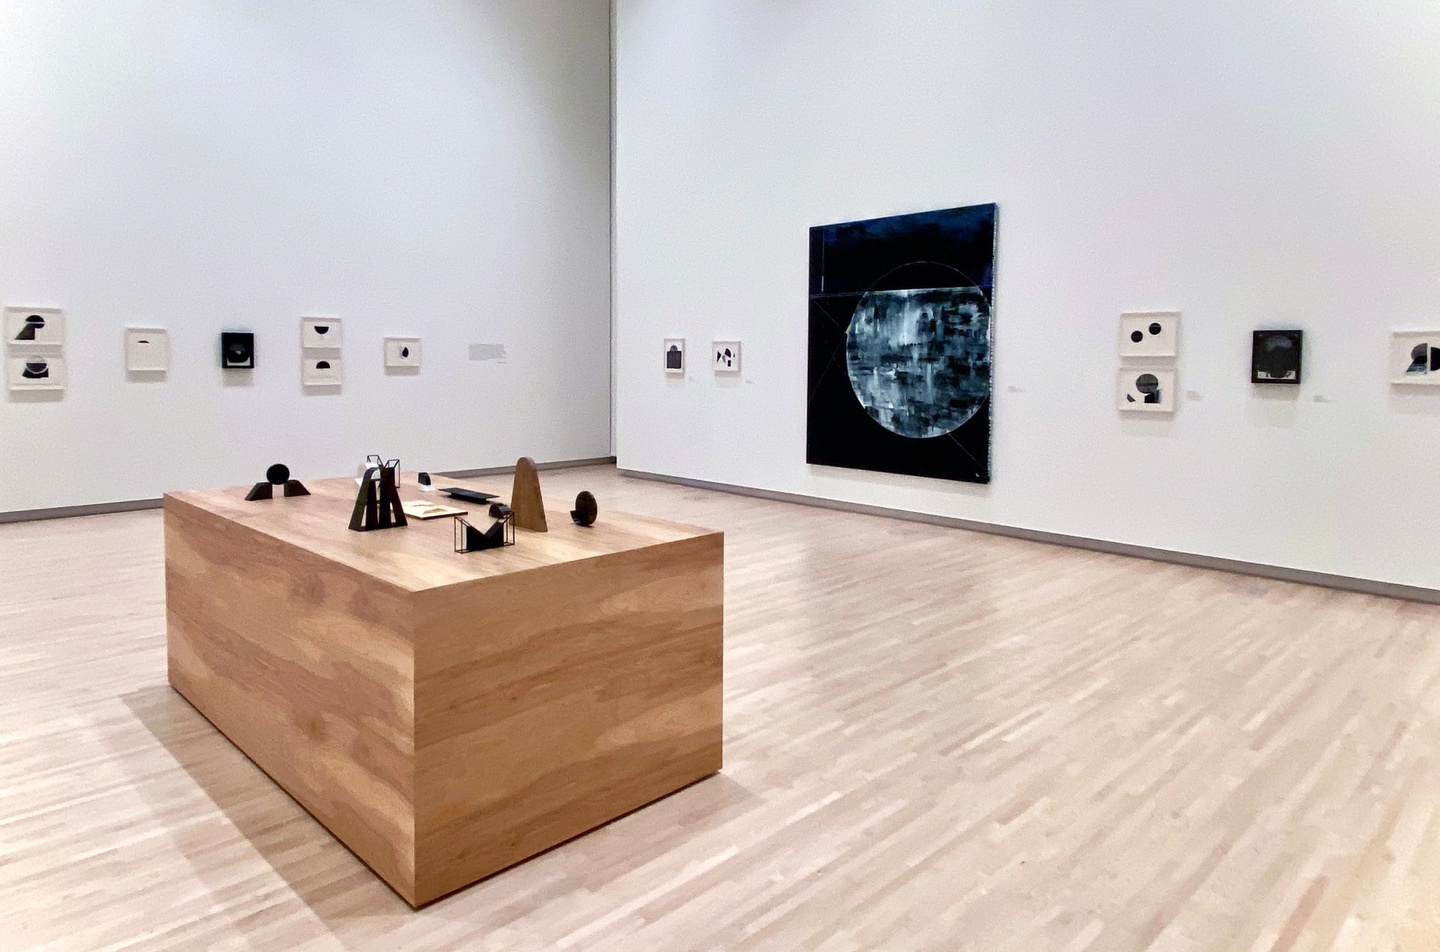 An exhibition installation with smaller geometric drawings, a large, dark geometric painting, and a wooden table with small geometric sculptures